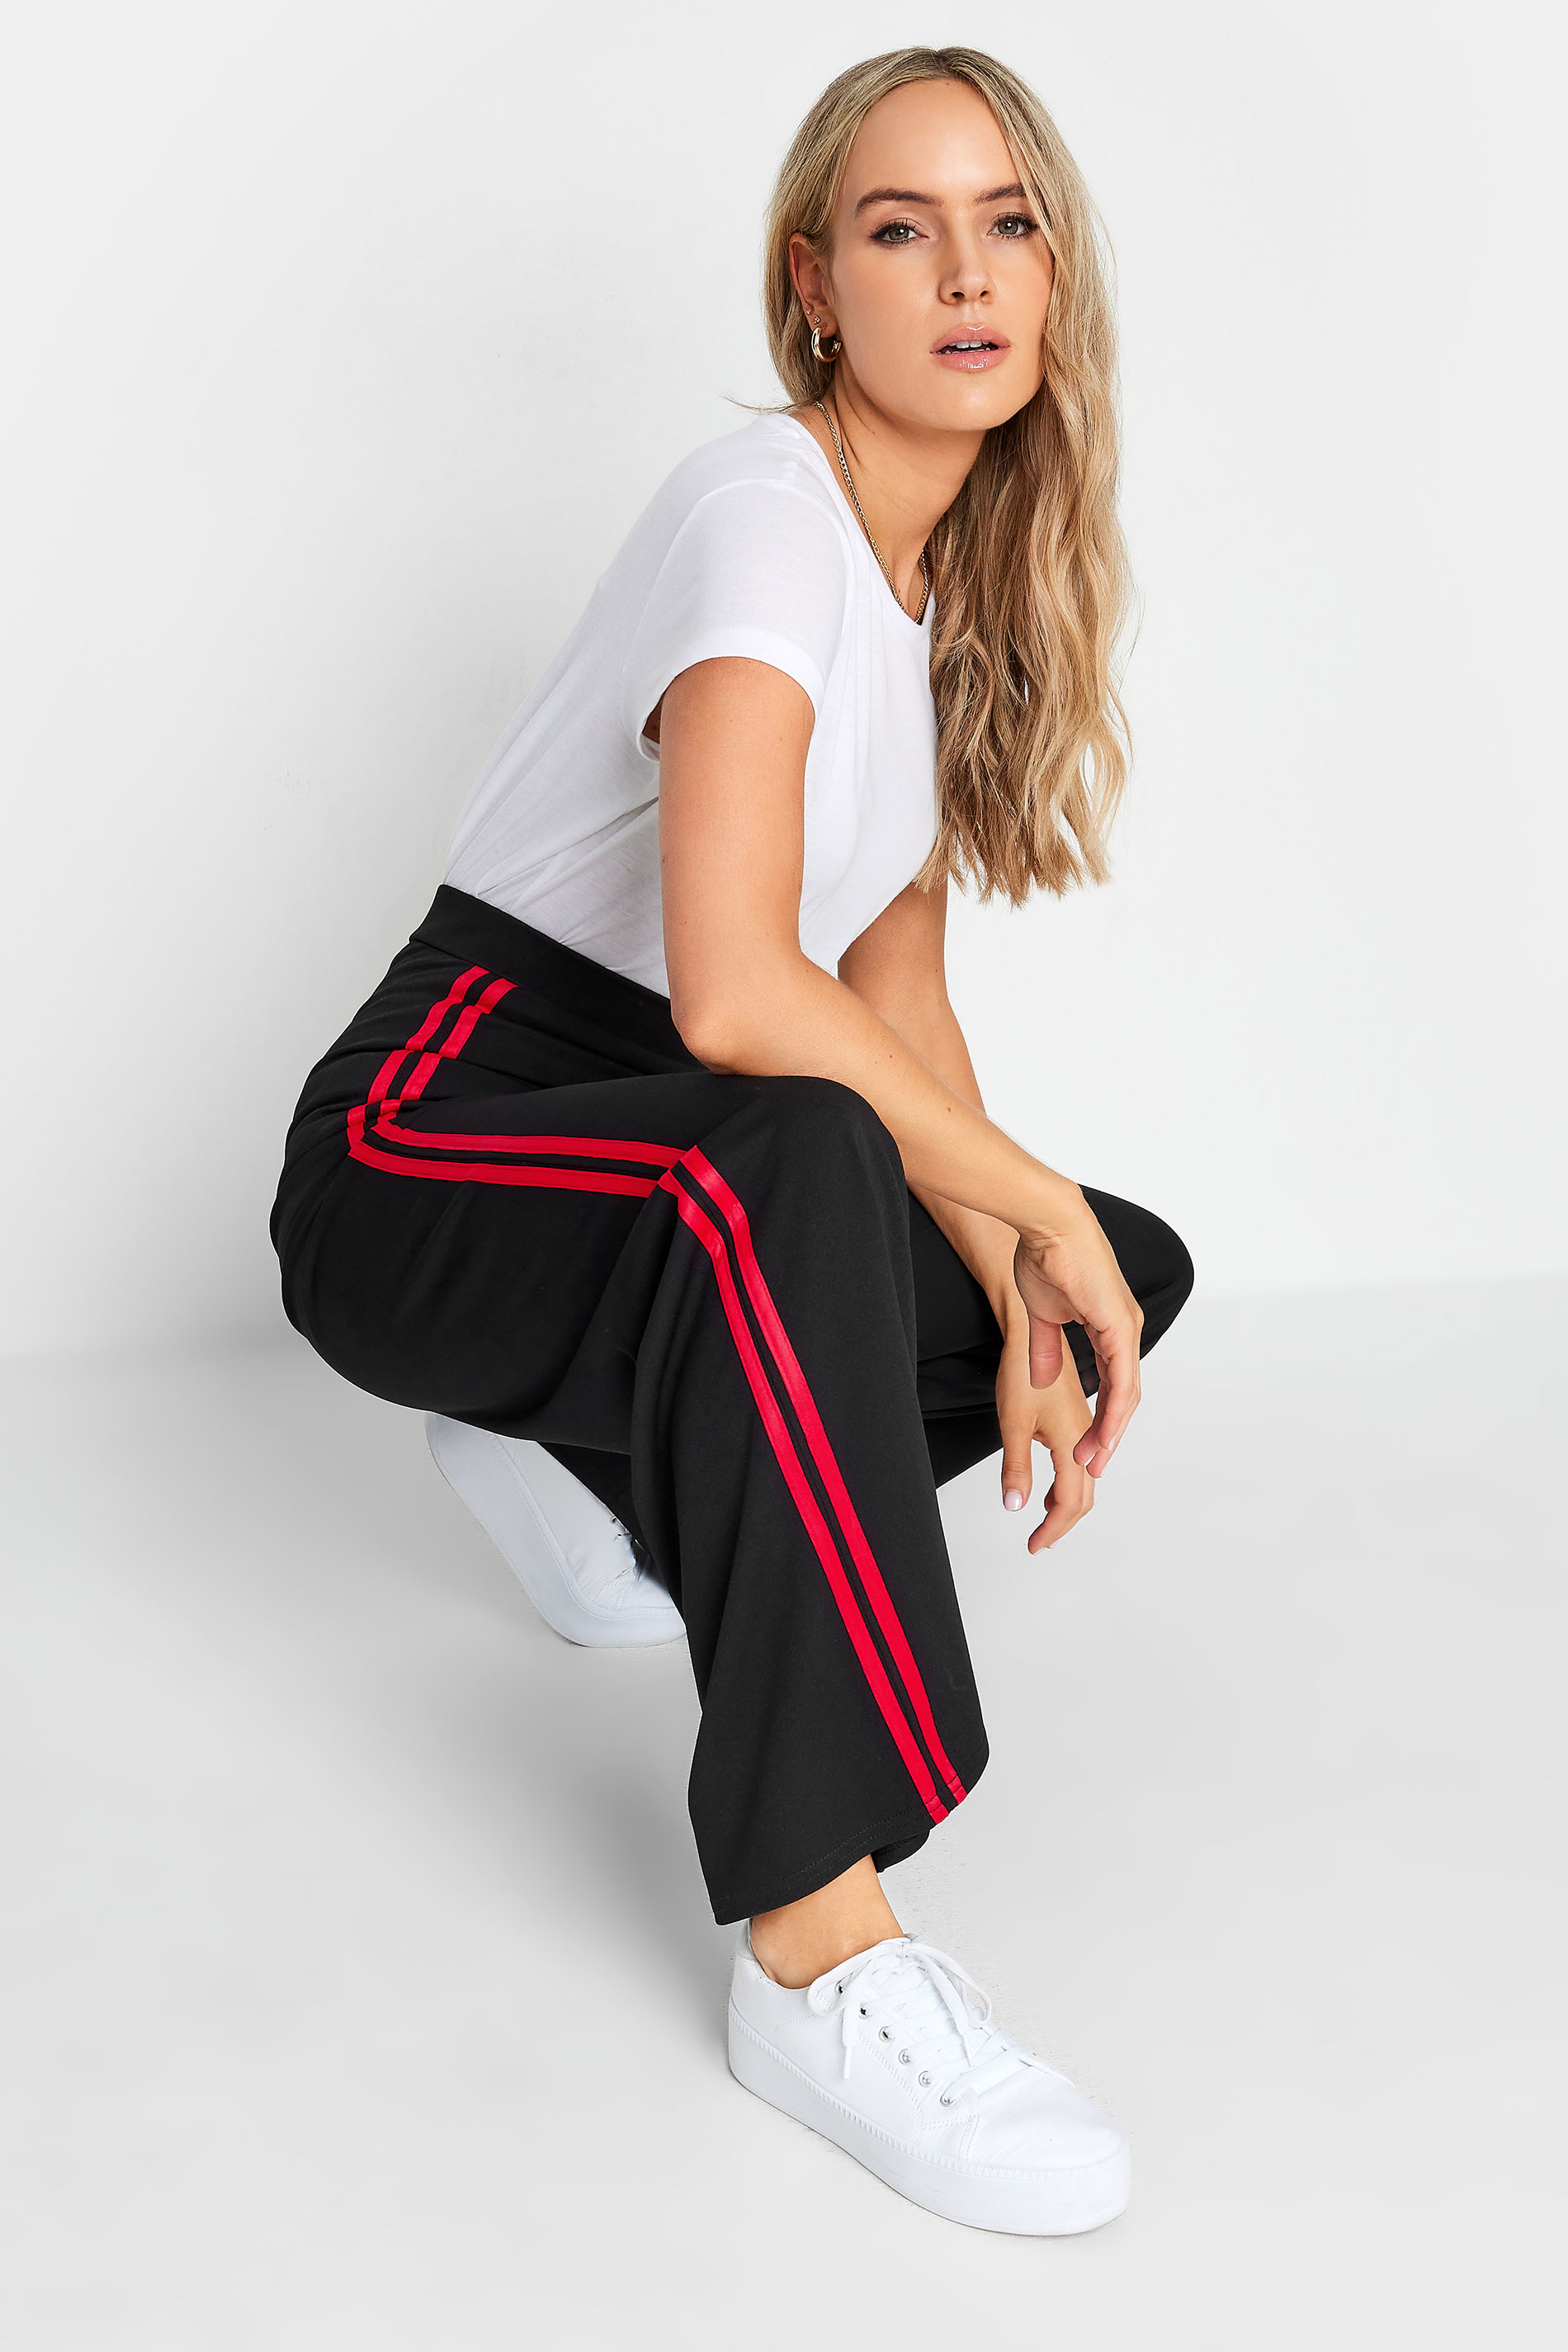 Yours Clothing SIDE STRIPE ACTIVE - Leggings - Trousers - Black